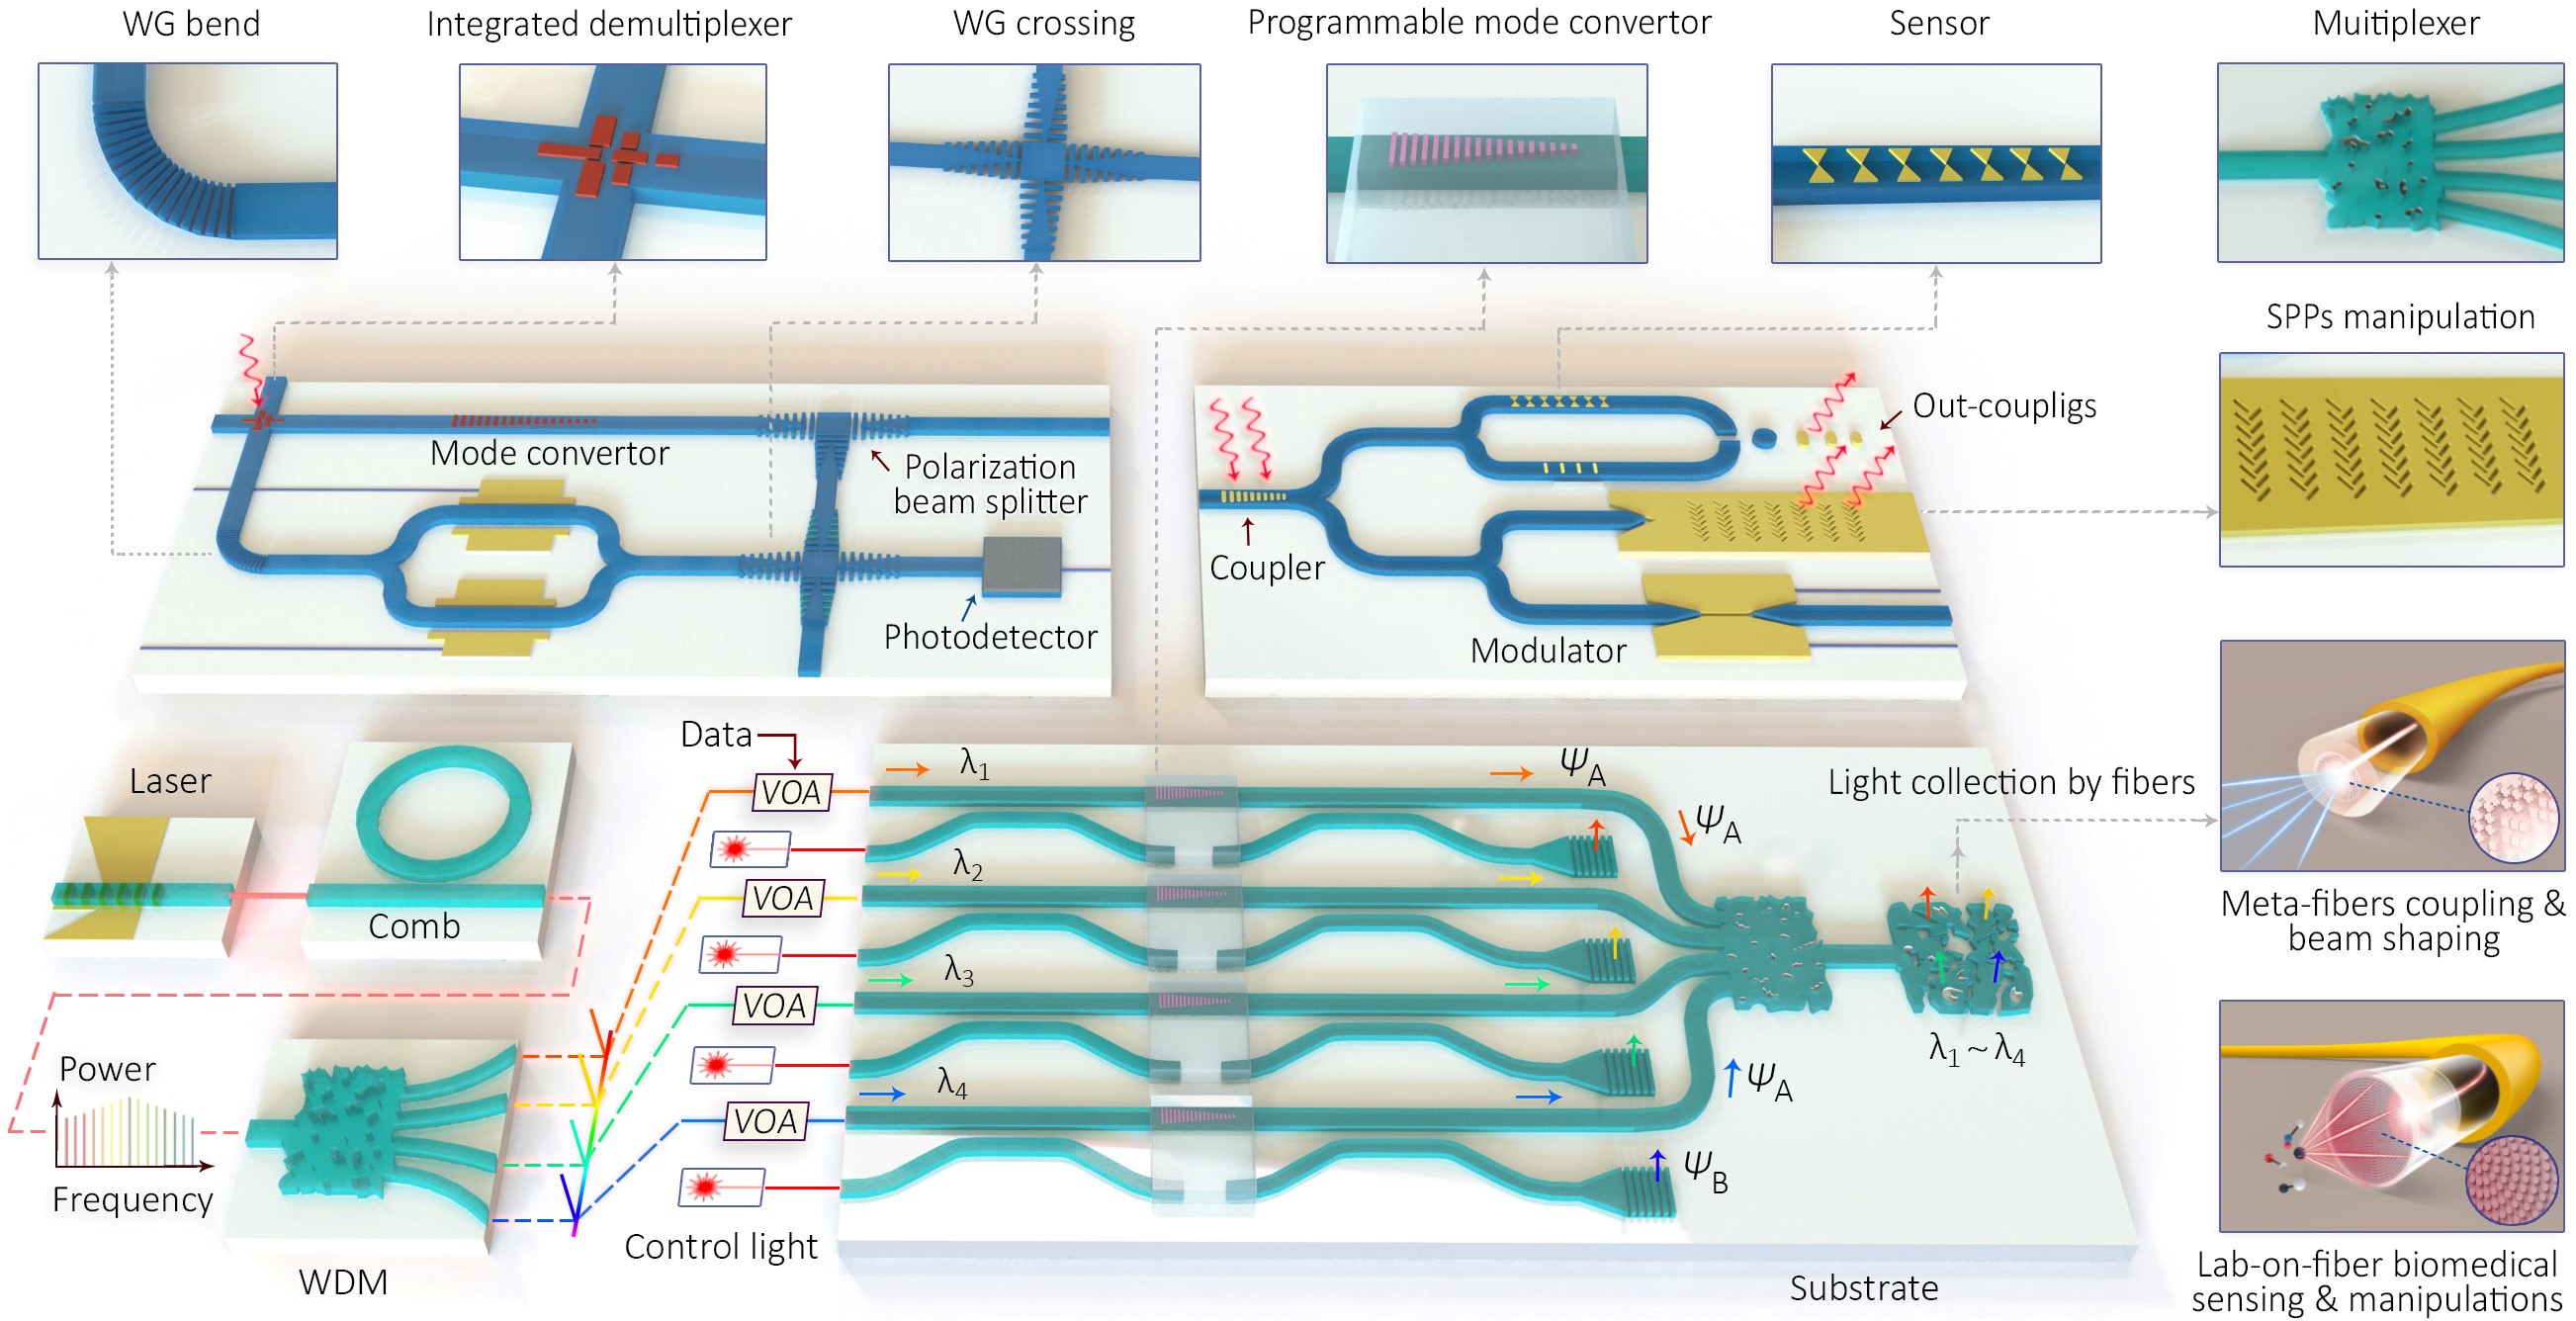 Fig. 2. Outlook on photonic integrated “meta-circuits”. Diverse meta-waveguide-based photonic devices can be competitive substitutes for conventional integrated optical scenarios with compact footprint, enhanced efficiency and multifunctionality. (Figure credit: Tsinghua University)